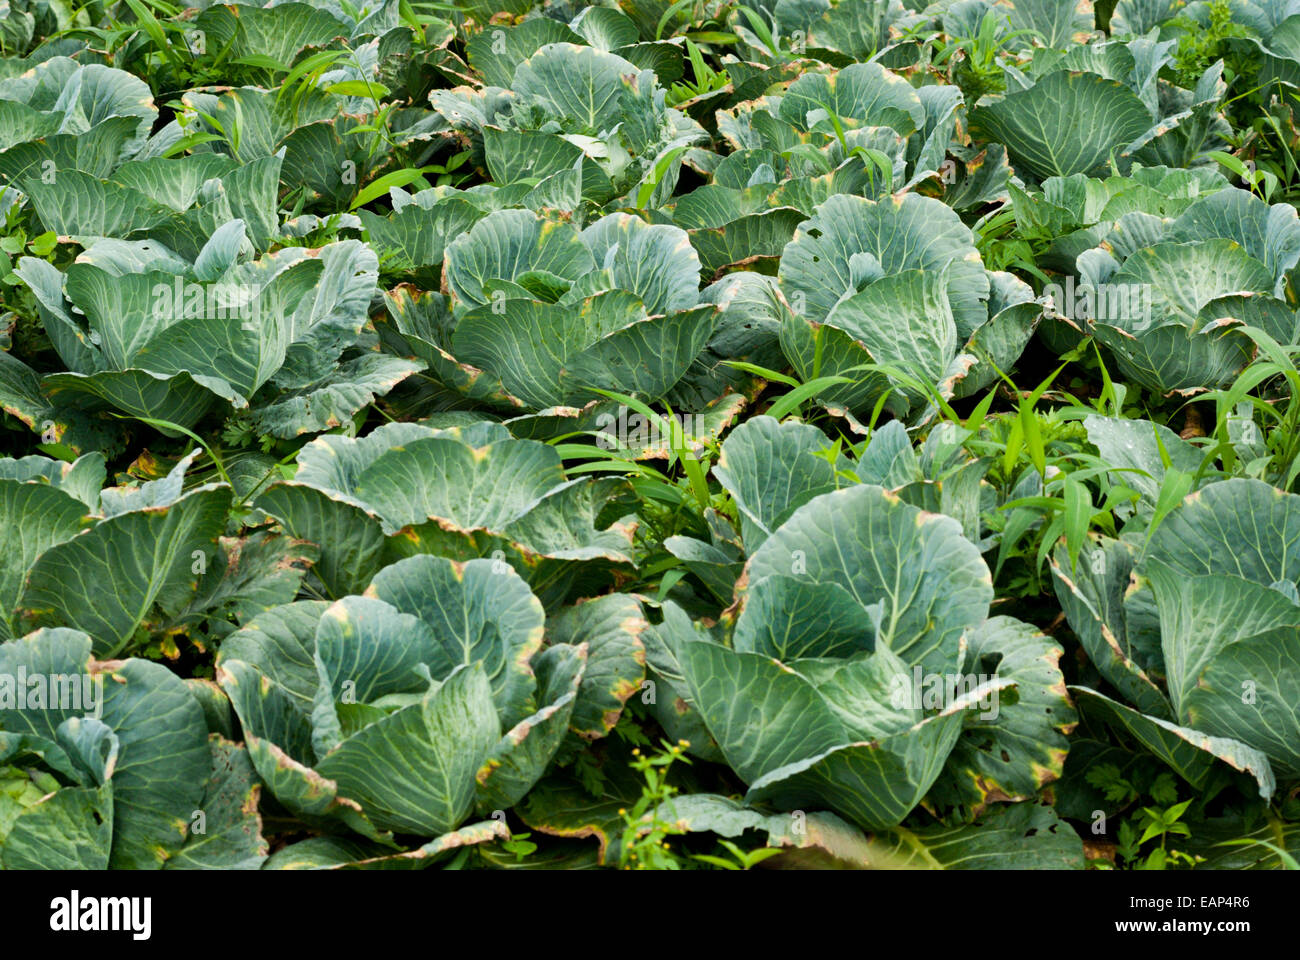 Cabbages at Rurukan, North Sulawesi, Indonesia. Stock Photo